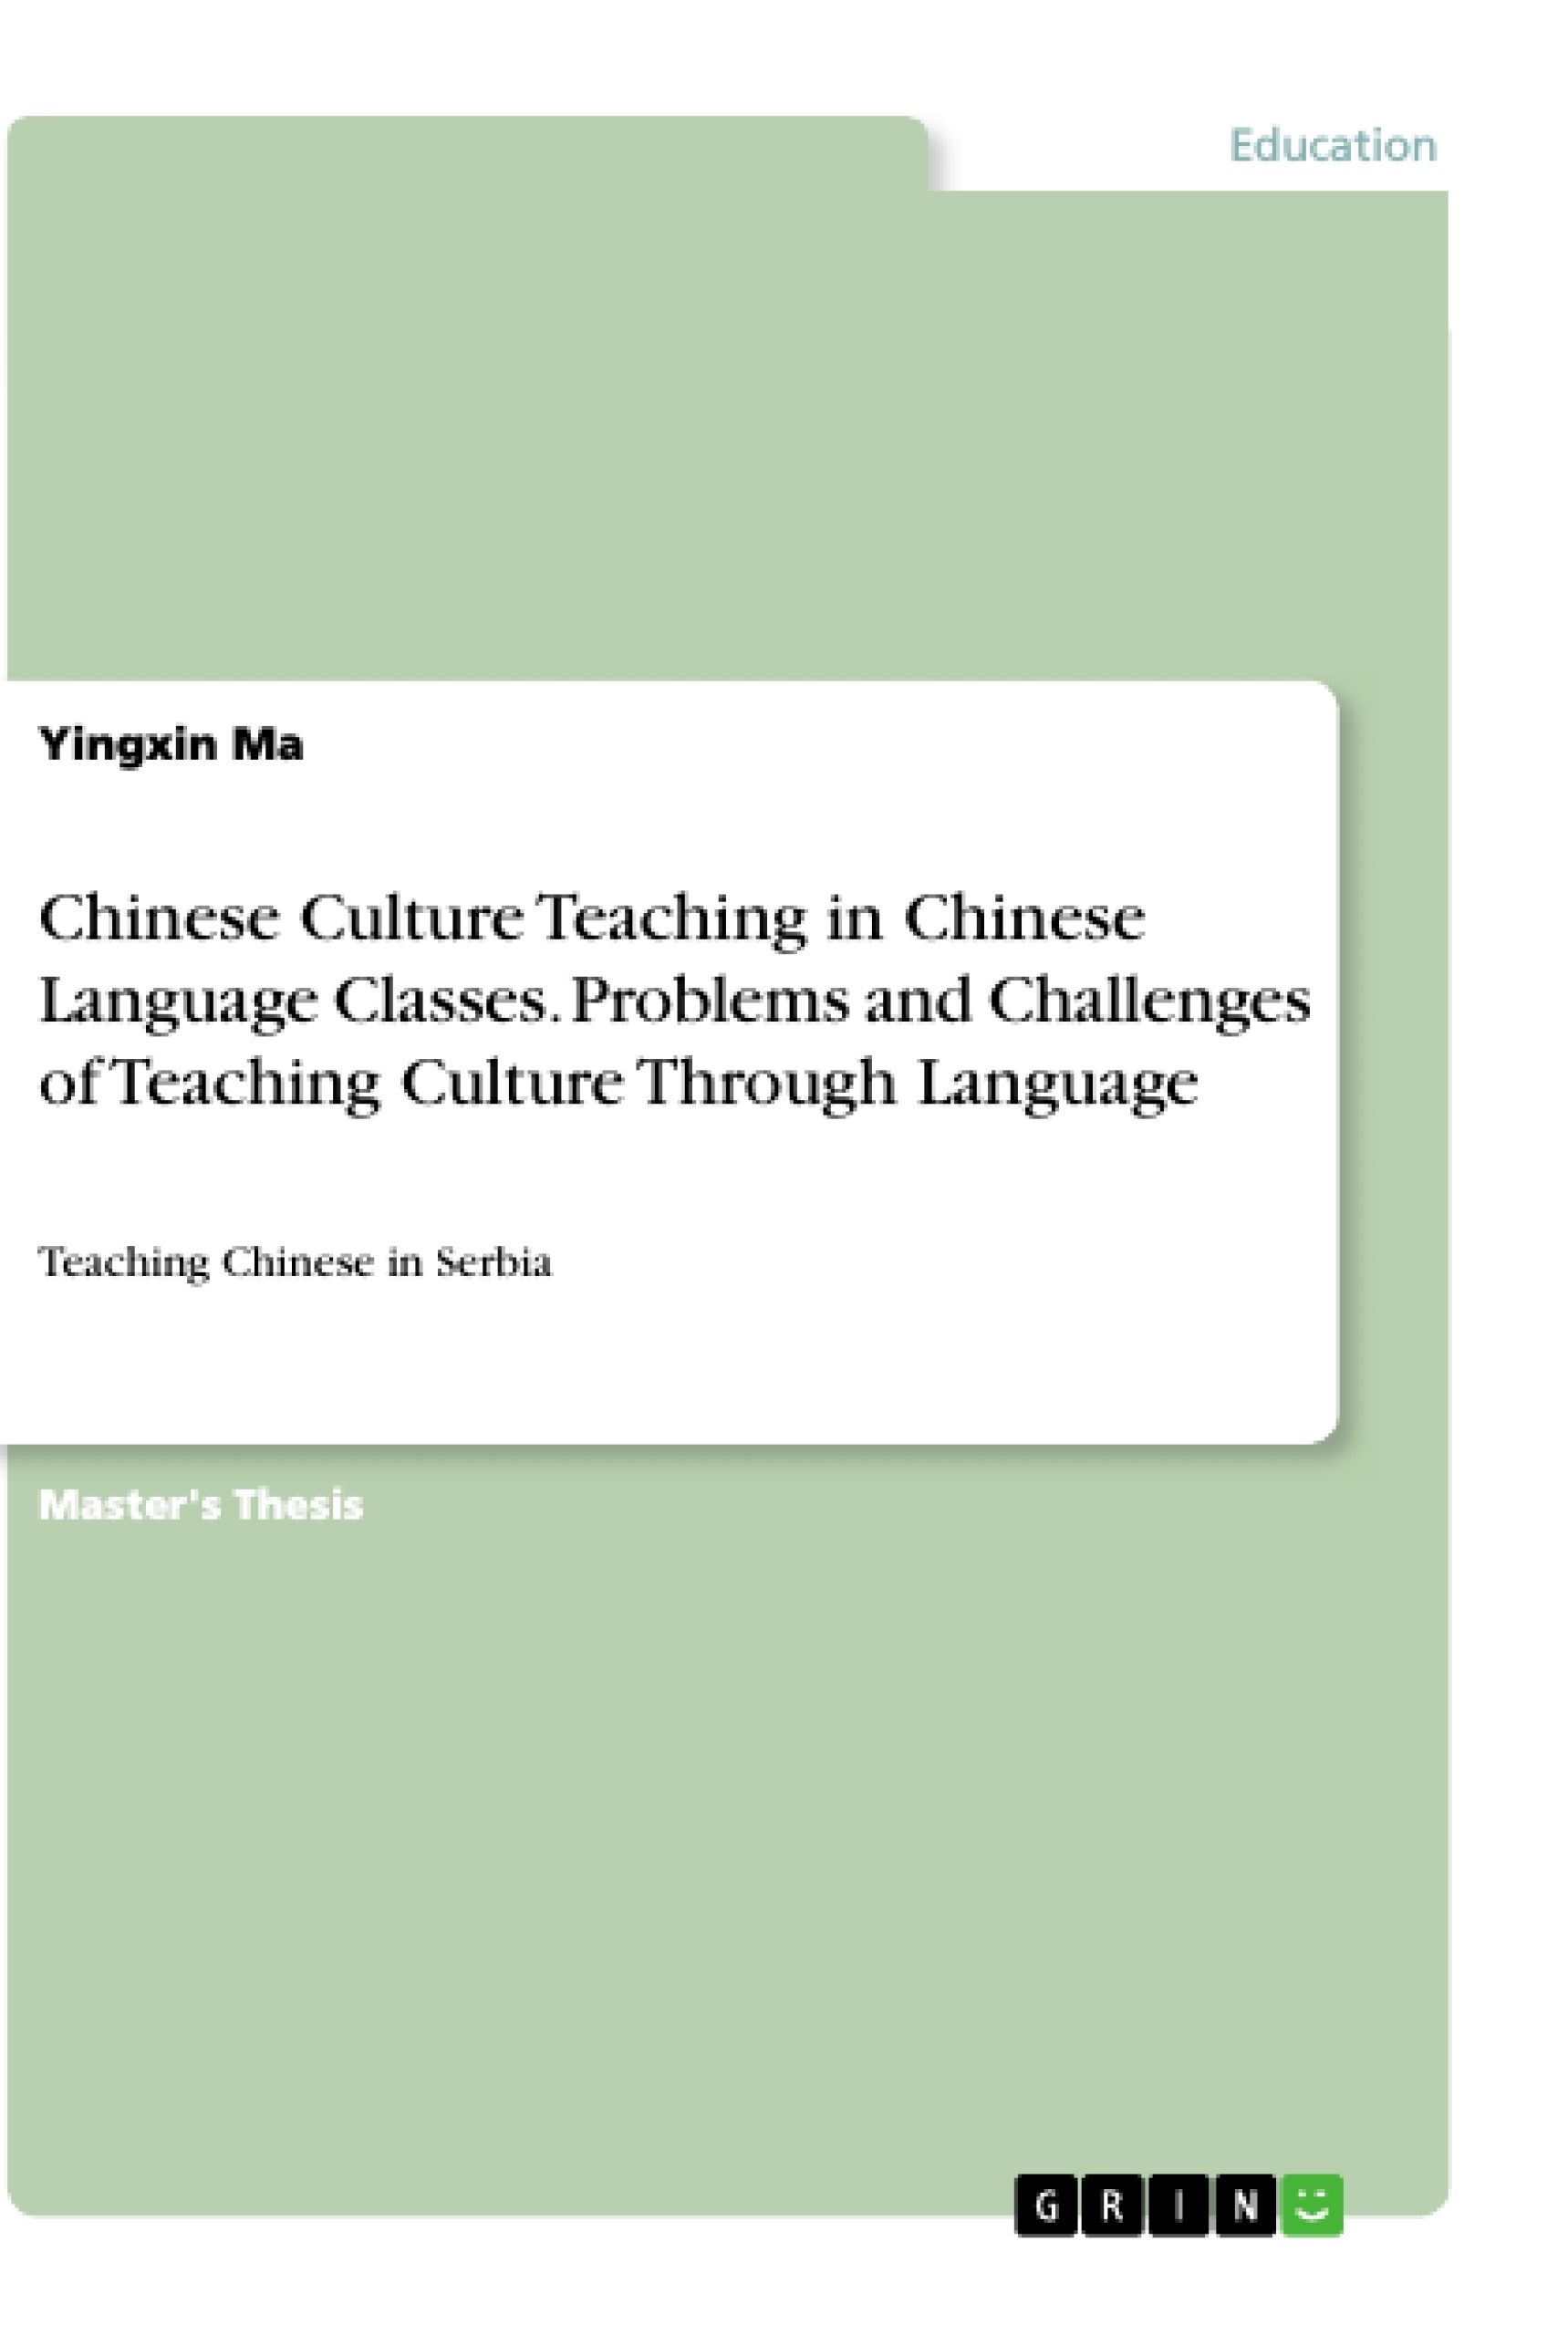 Title: Chinese Culture Teaching in Chinese Language Classes. Problems and Challenges of Teaching Culture Through Language